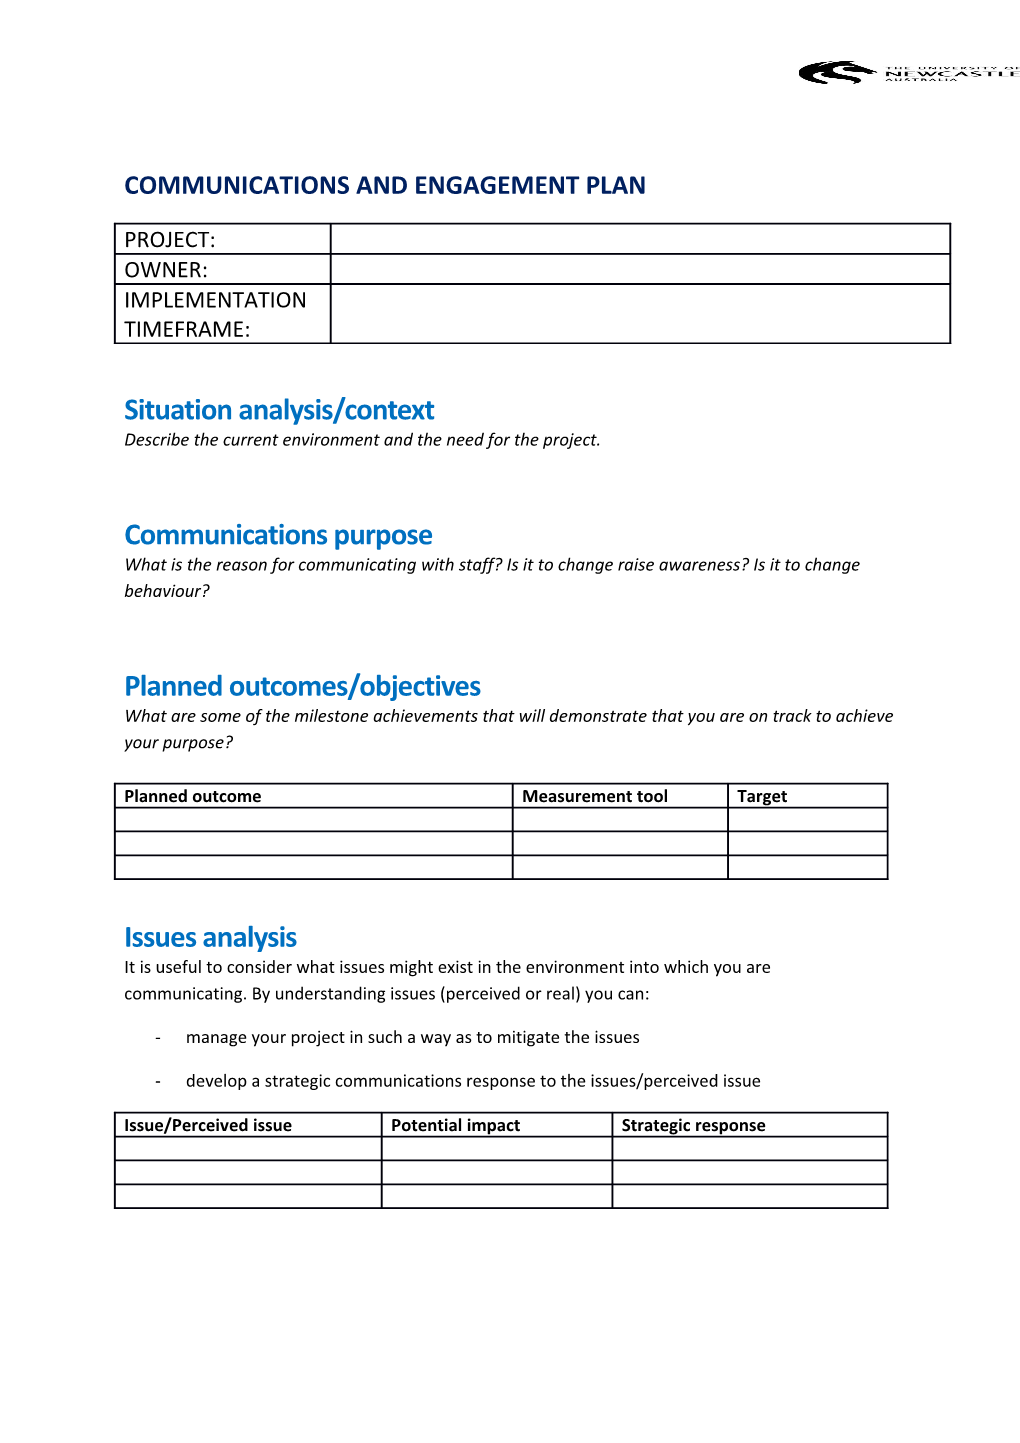 Communications and Engagement Plan